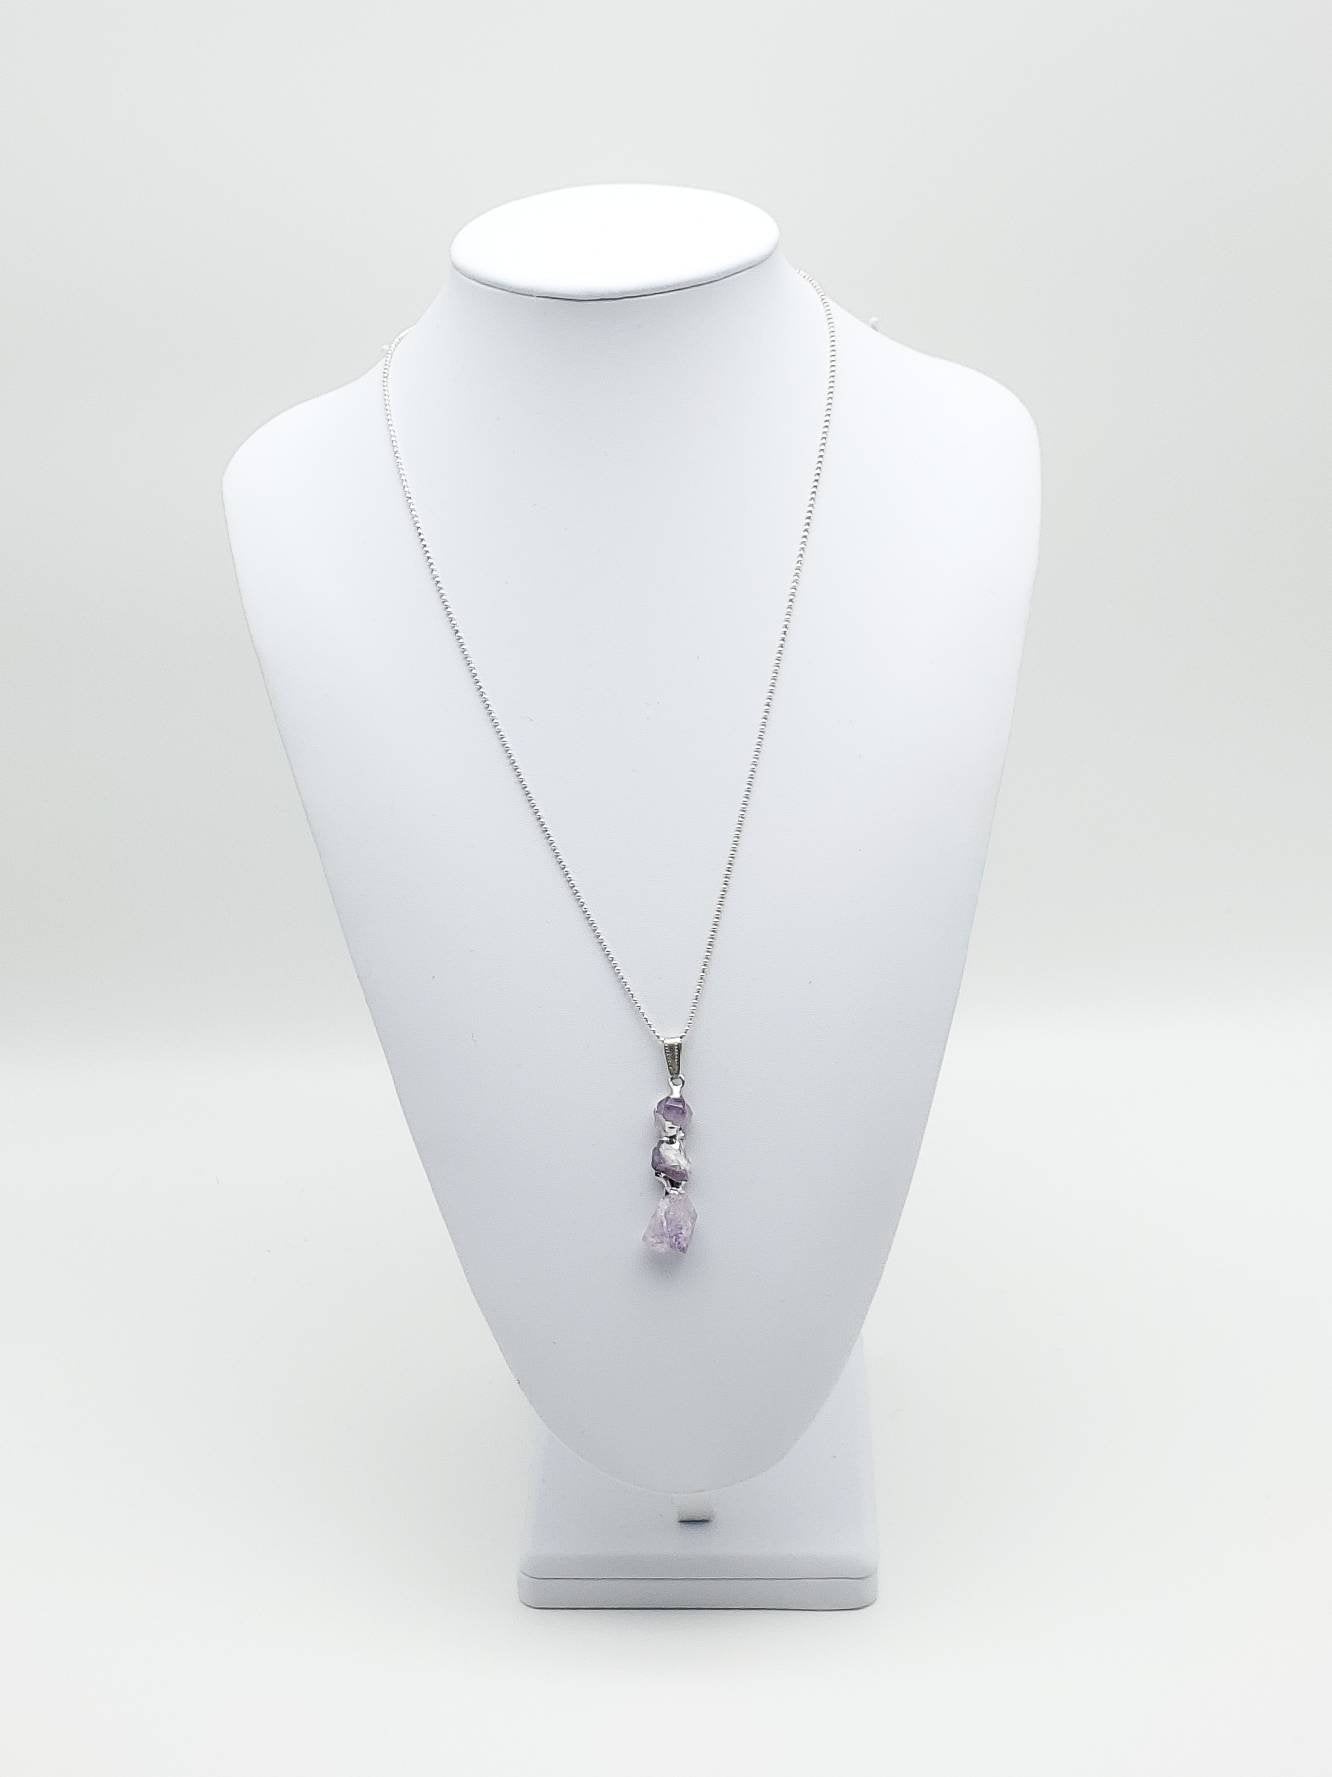 Raw Amethyst Silver Soldered Pendant Necklace - The Caffeinated Raven